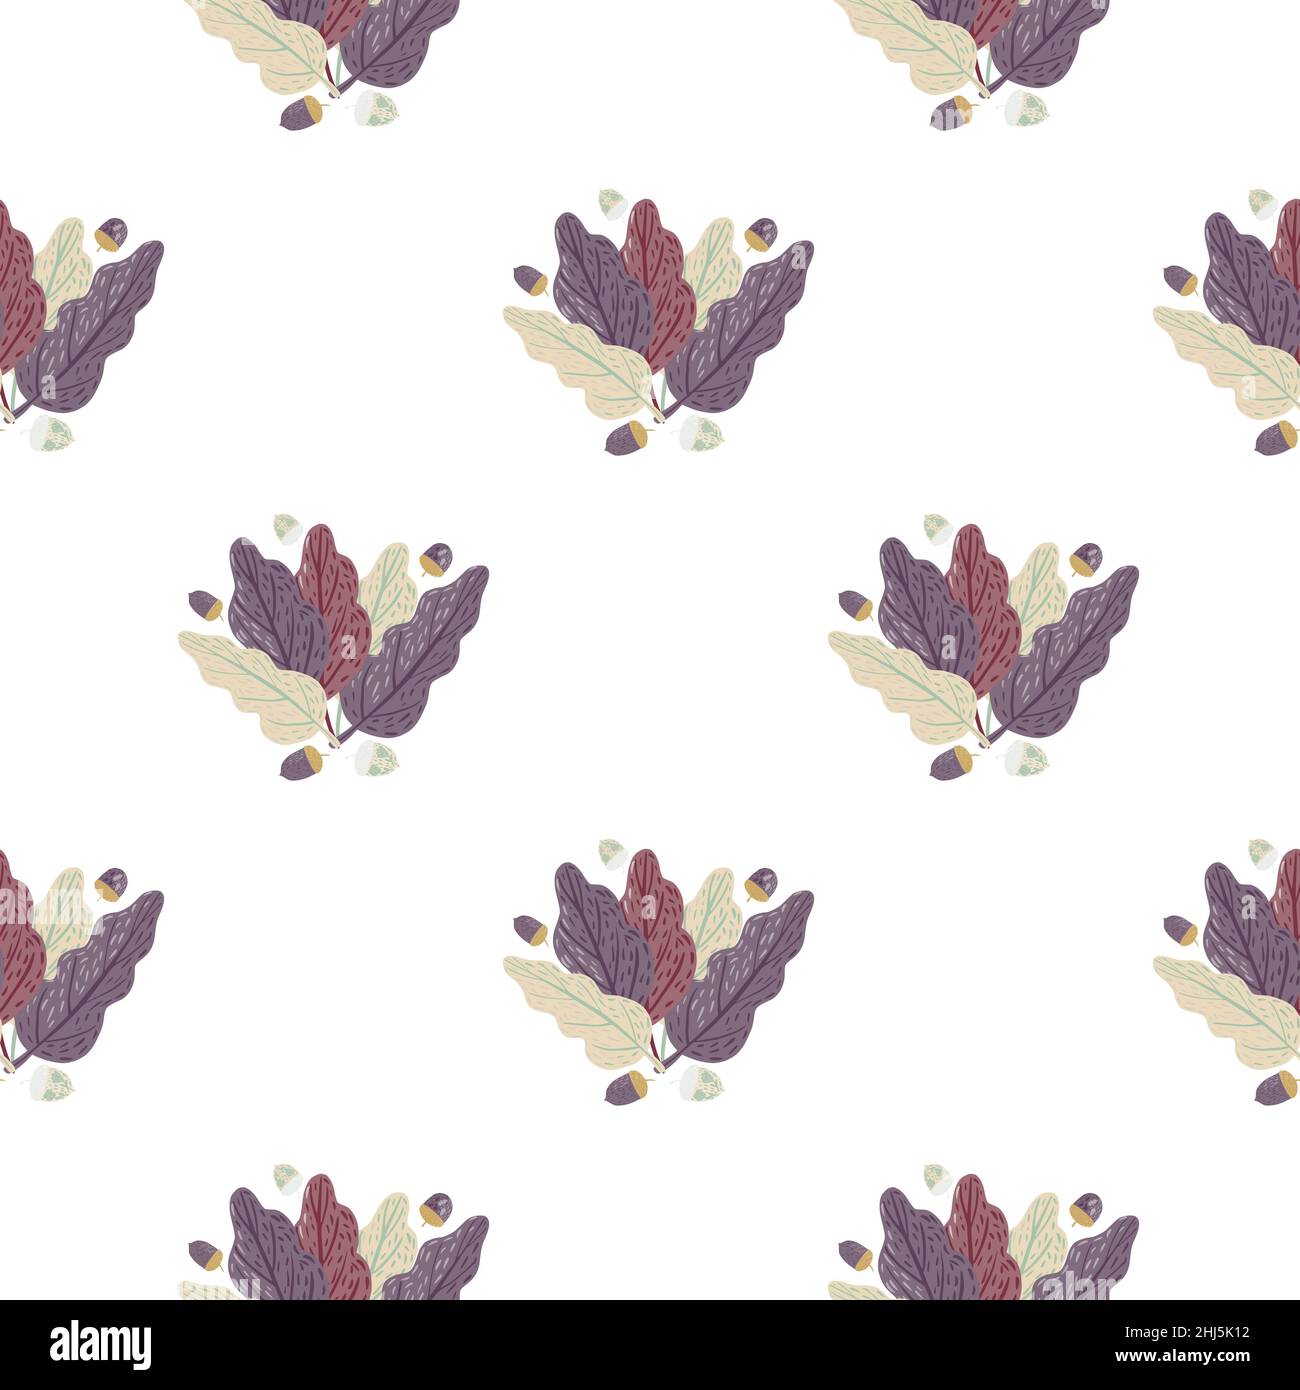 Decorative seamless pattern with purple tones leaf ornament. Isolated print. Graphic design for wrapping paper and fabric textures. Vector Illustratio Stock Vector